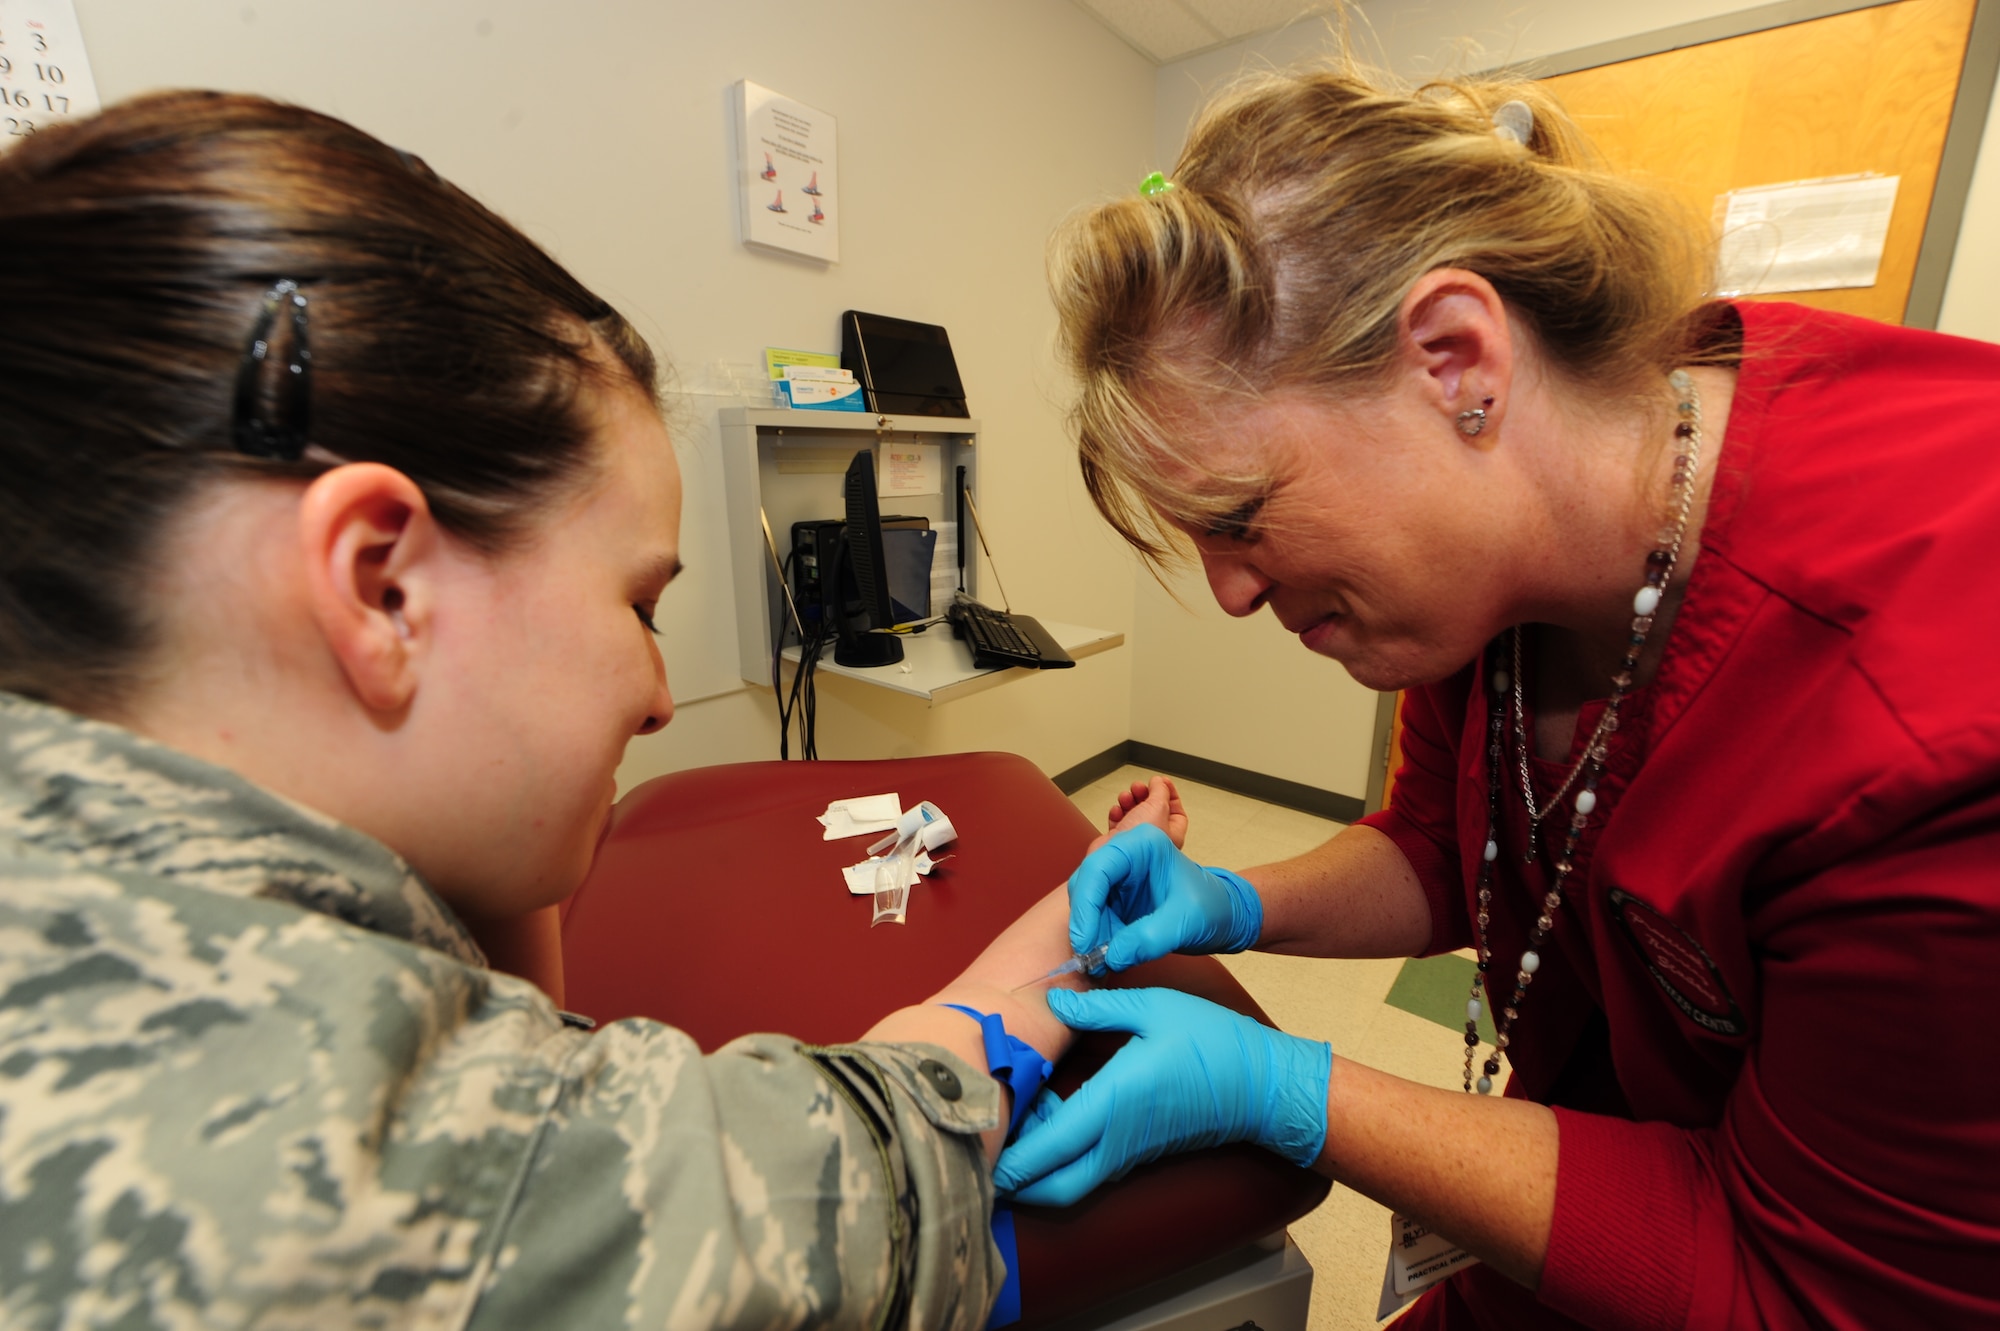 WHITEMAN AIR FORCE BASE, Mo. -- Airman 1st Class Brandy Ortiz, 509th Medical Operations Squadron aerospace medical technician, gets her blood taken by Mel Blyth, Warrensburg Area Career Center licensed practical nursing student, April 4. Patients get their blood taken to ensure they have the proper nutrients being delivered to their organs. (U.S. Air Force photo/Senior Airman Nick Wilson)